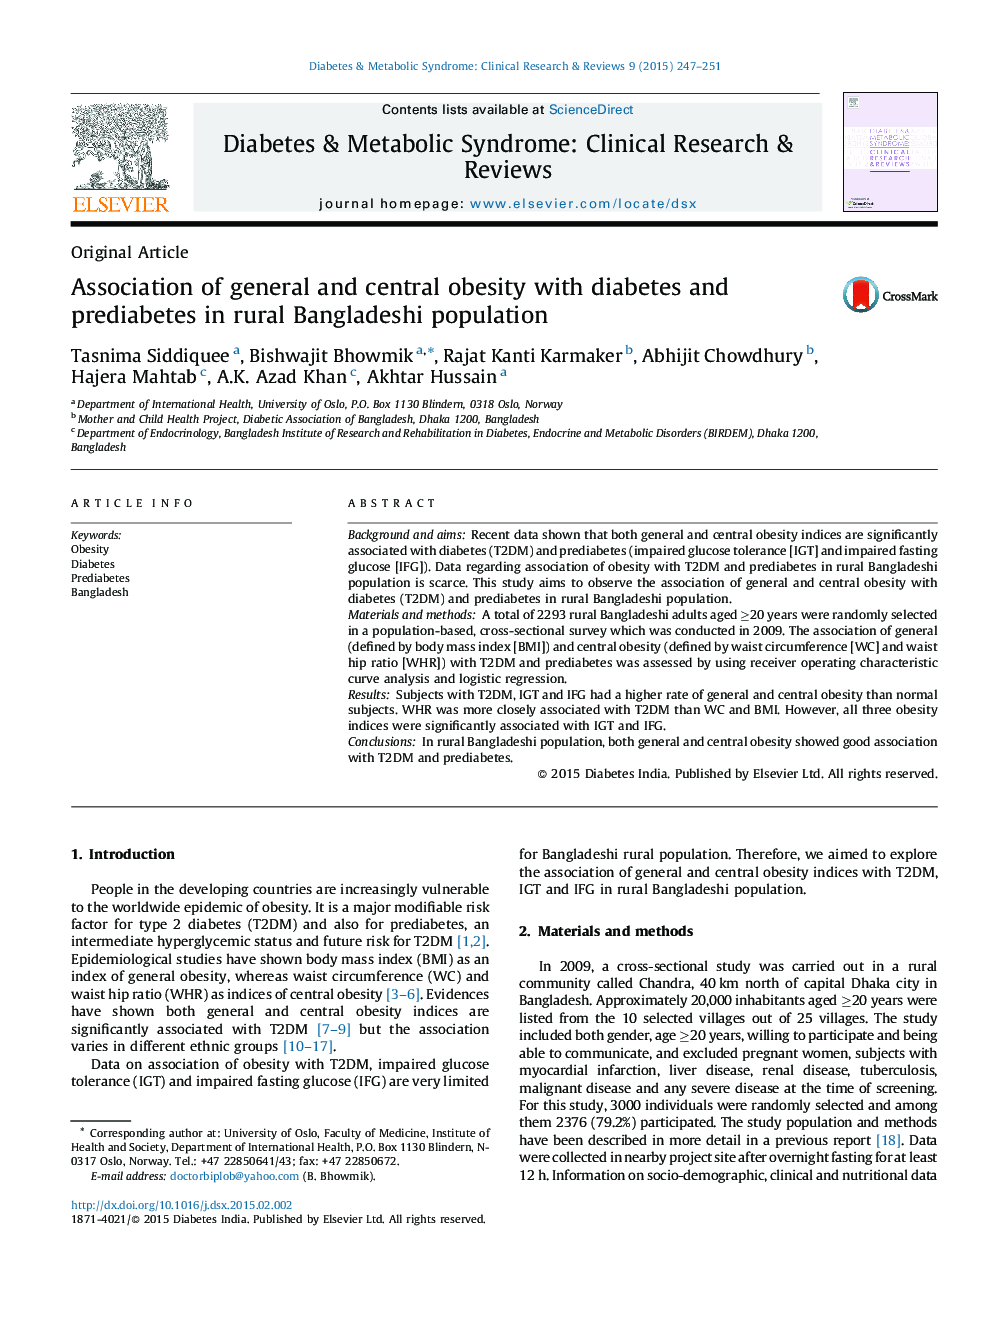 Association of general and central obesity with diabetes and prediabetes in rural Bangladeshi population